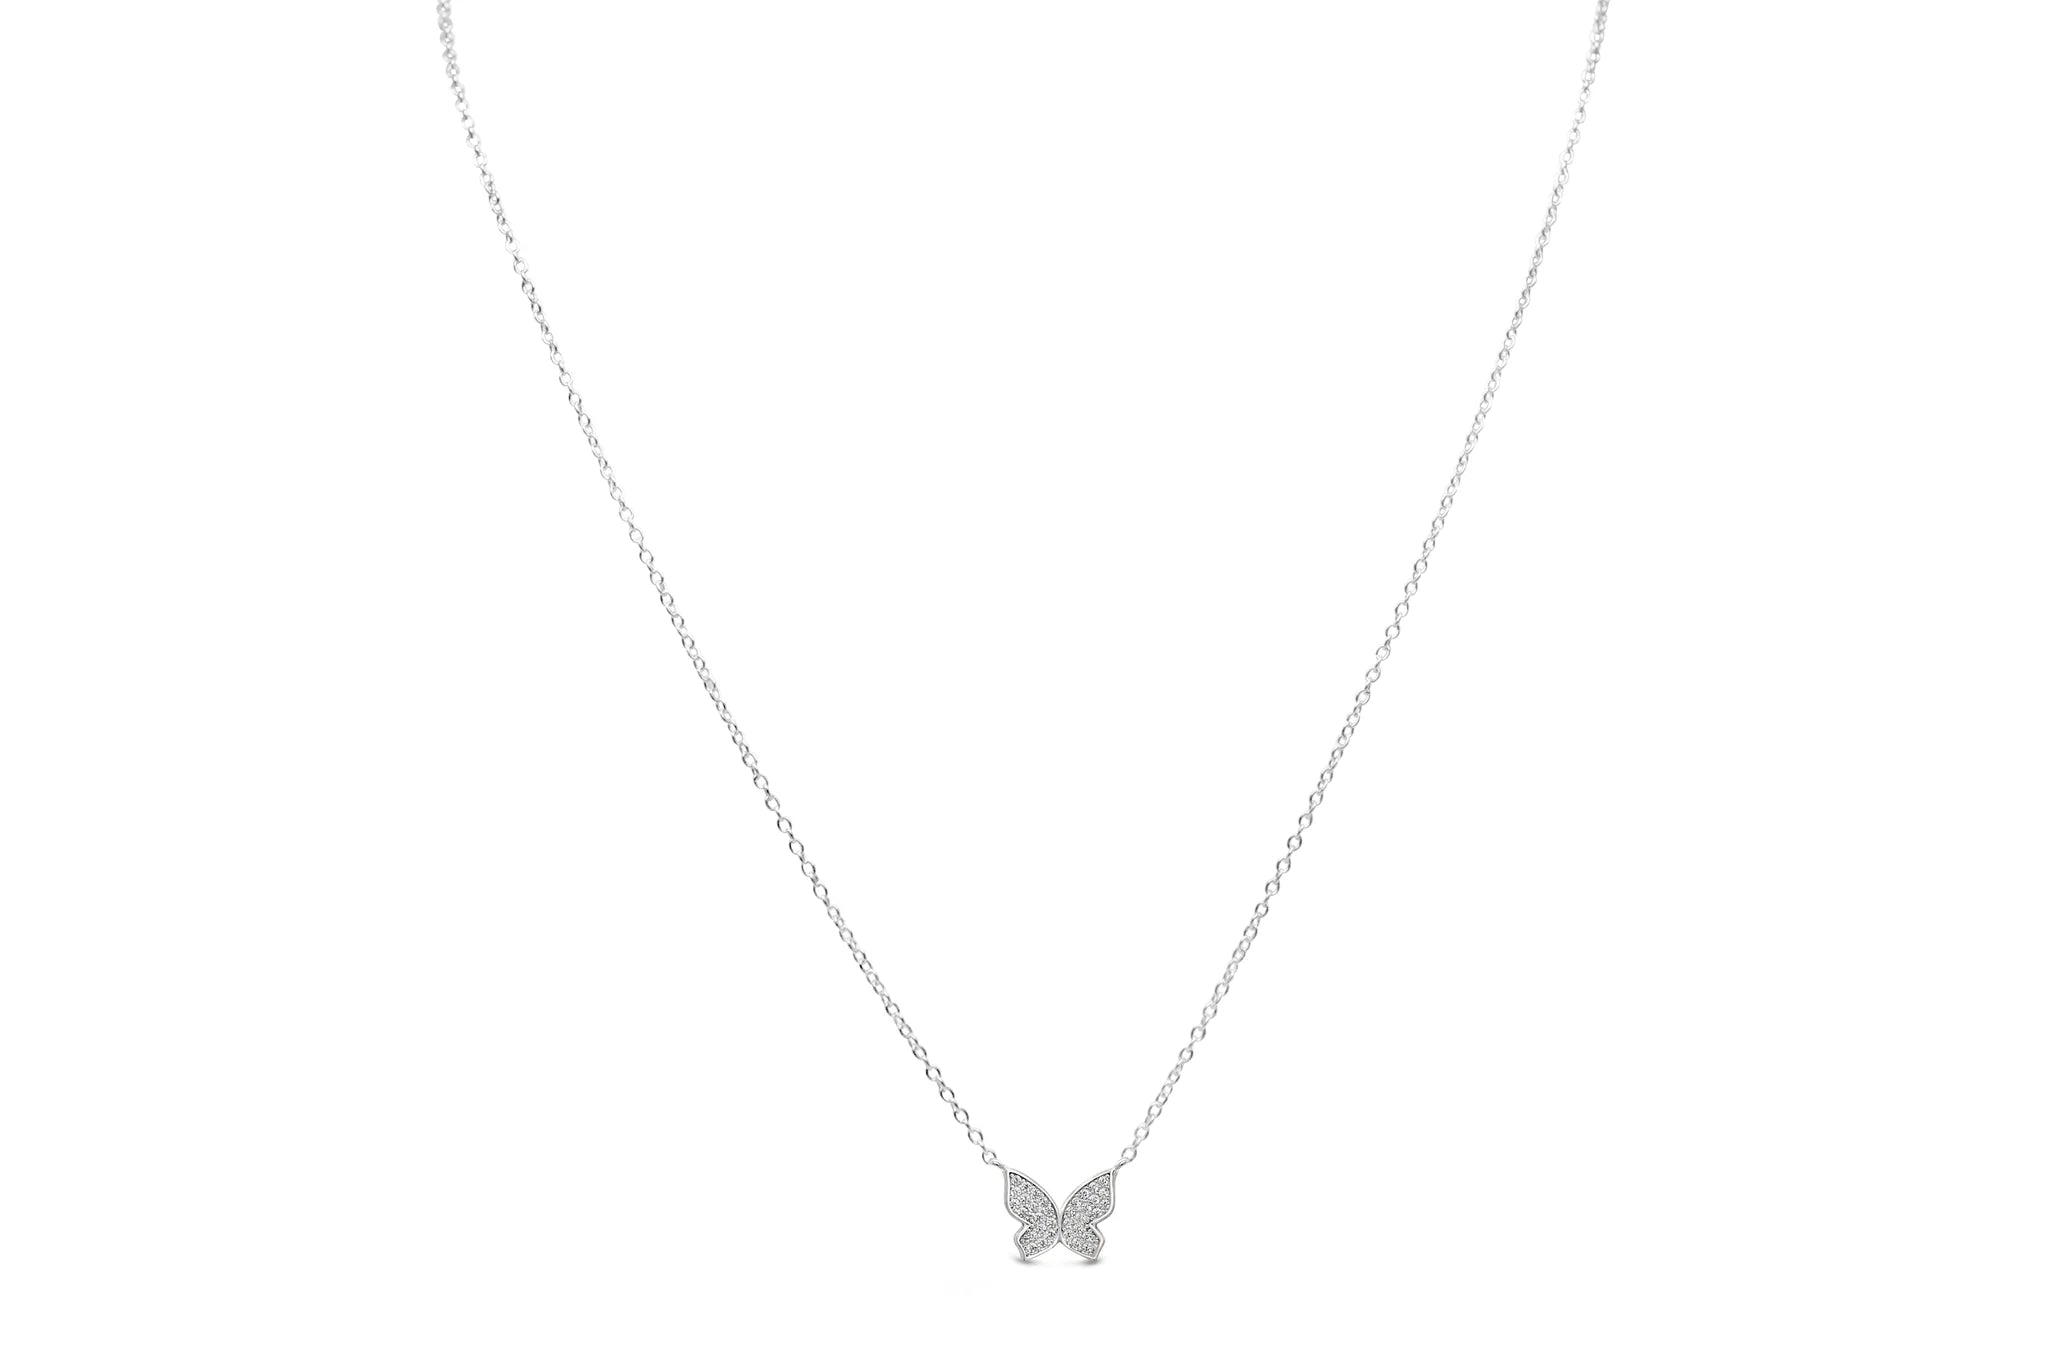 Stia Spread Your Wings Necklaces